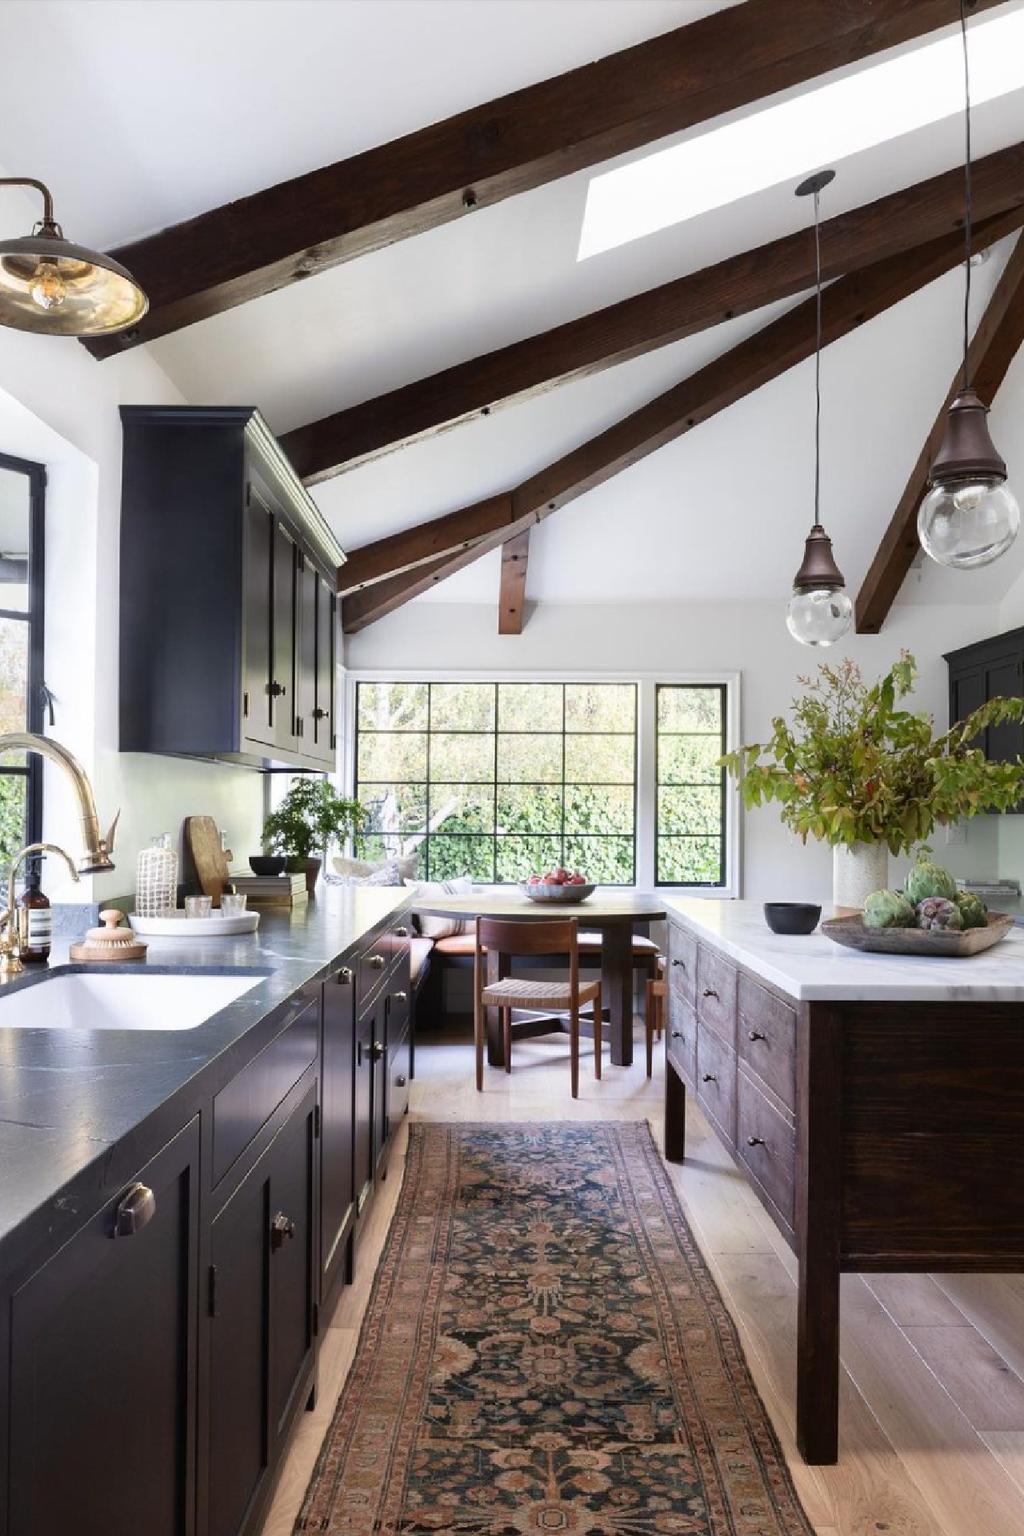 6 Things The World's Most Beautiful Kitchens Have In Common